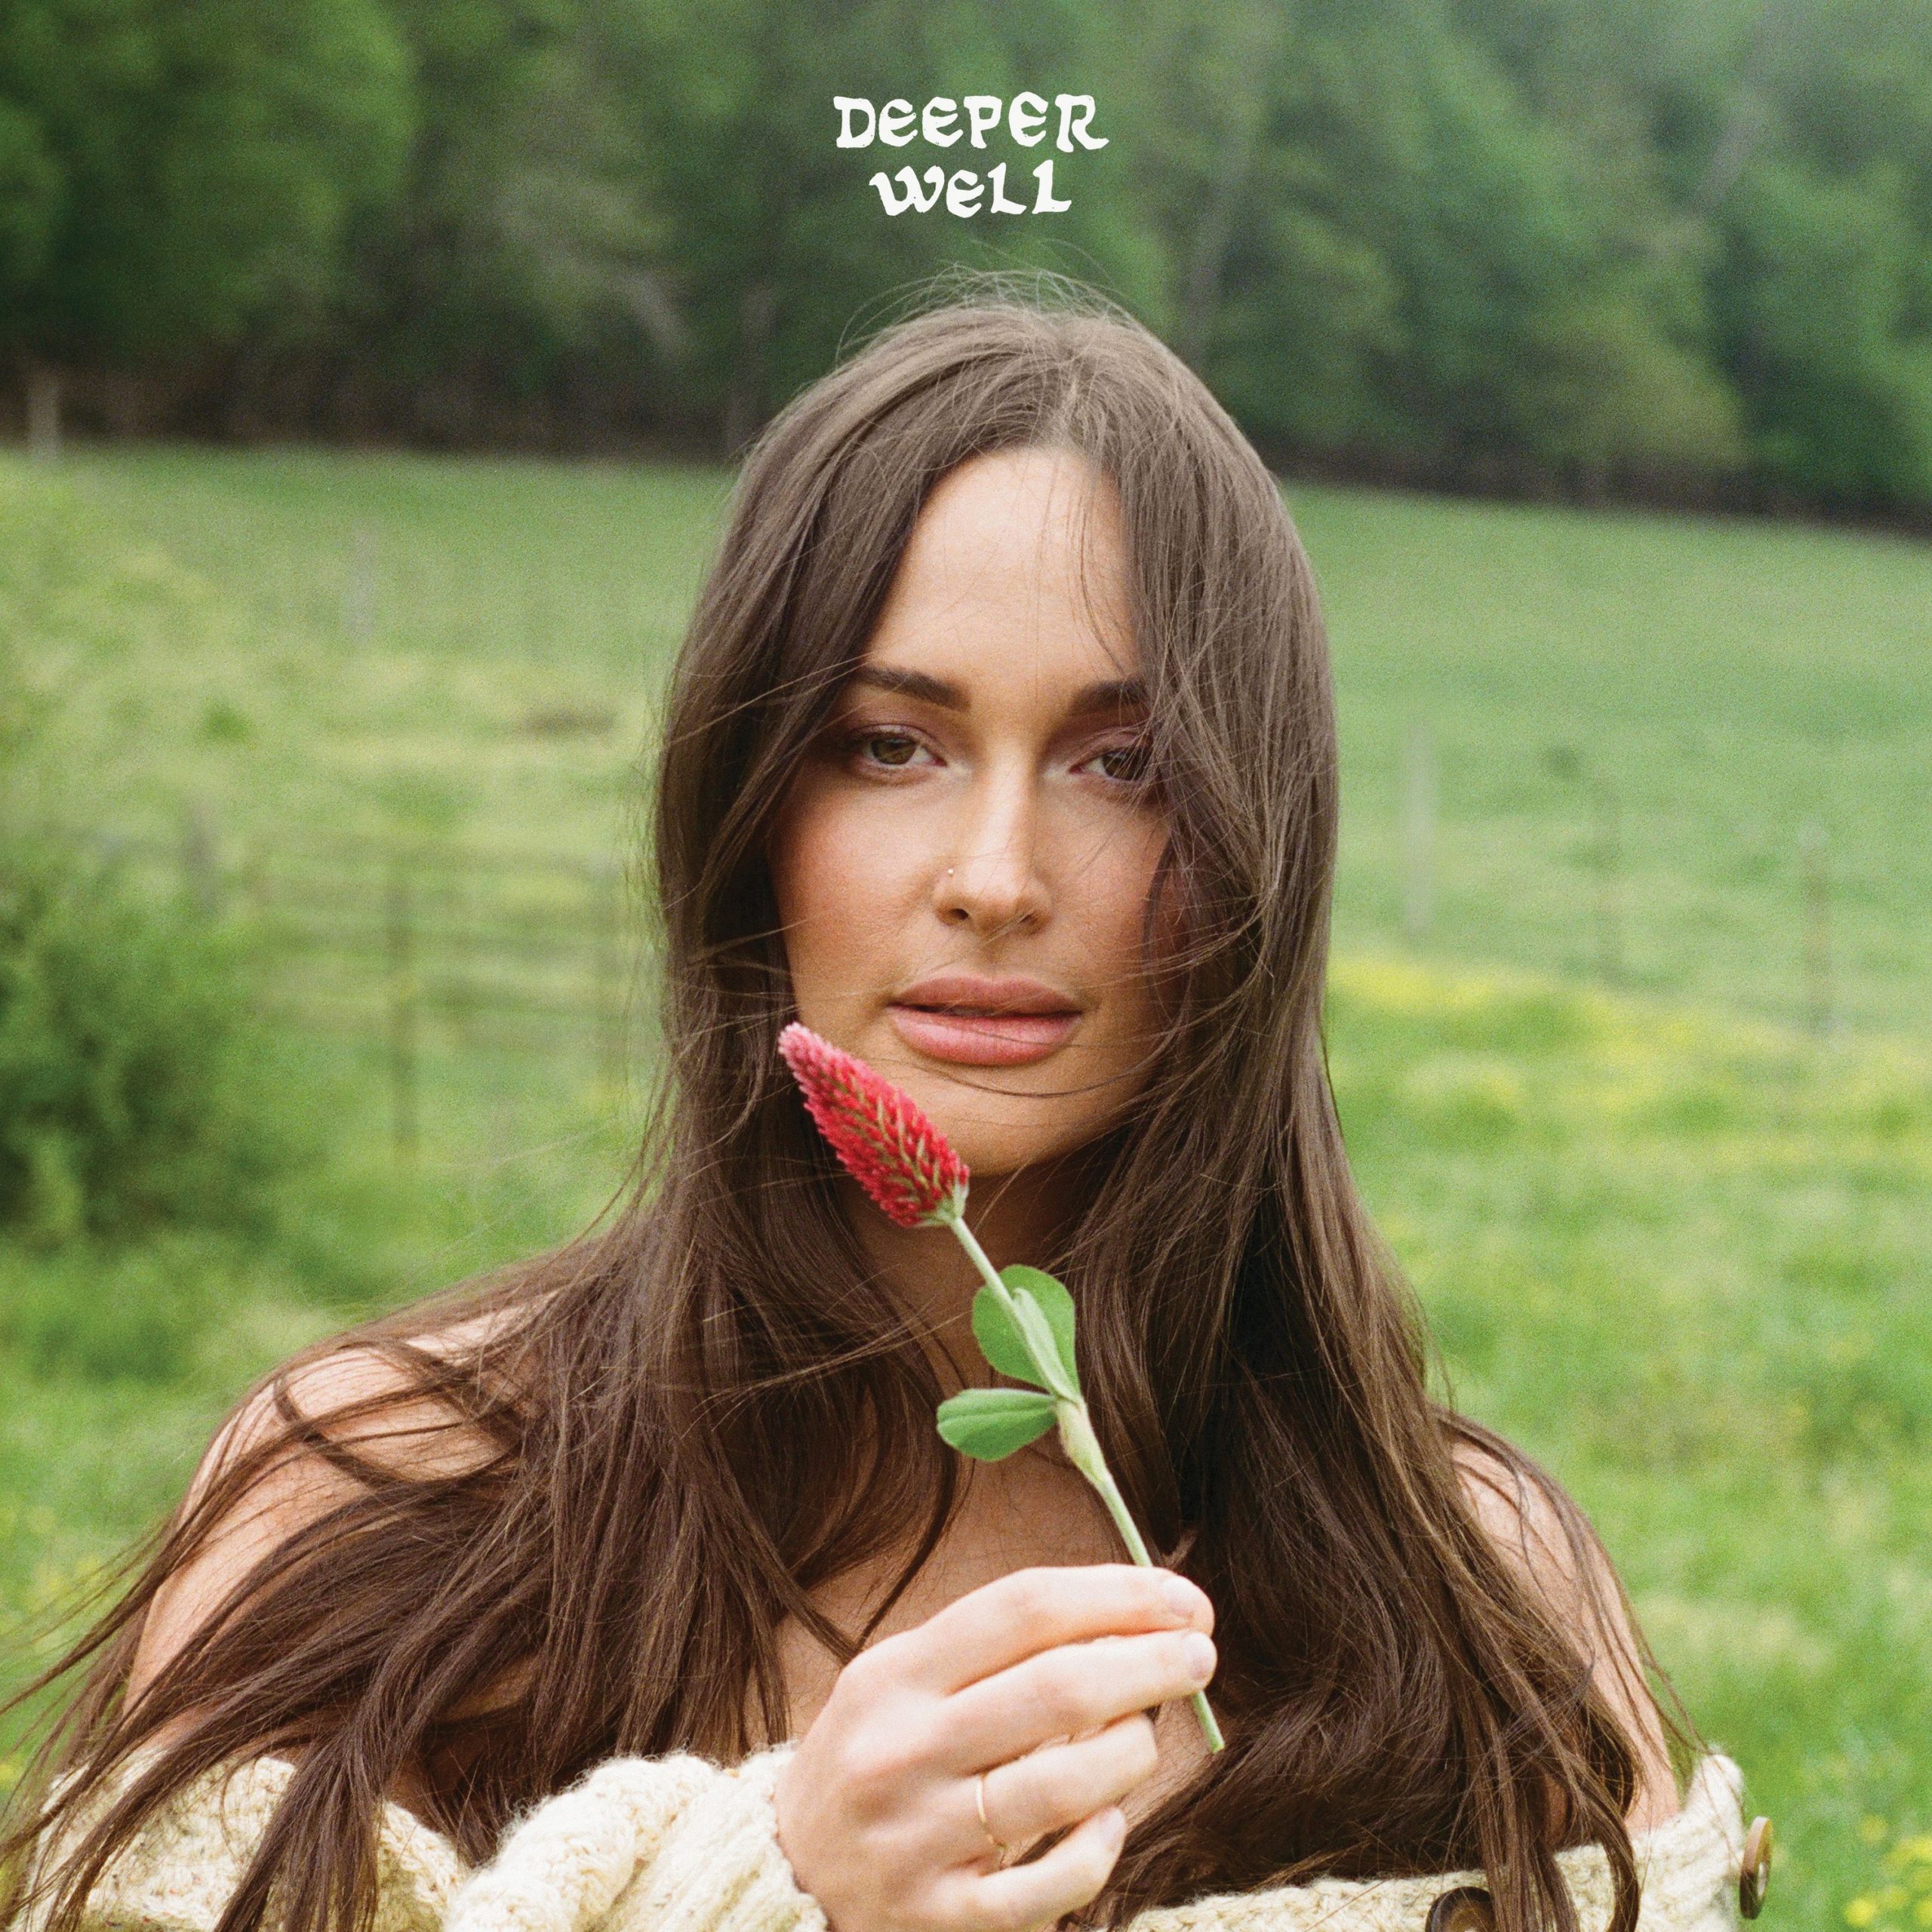 KACEY MUSGRAVES’ NEW ALBUM ‘DEEPER WELL’ OUT NOW